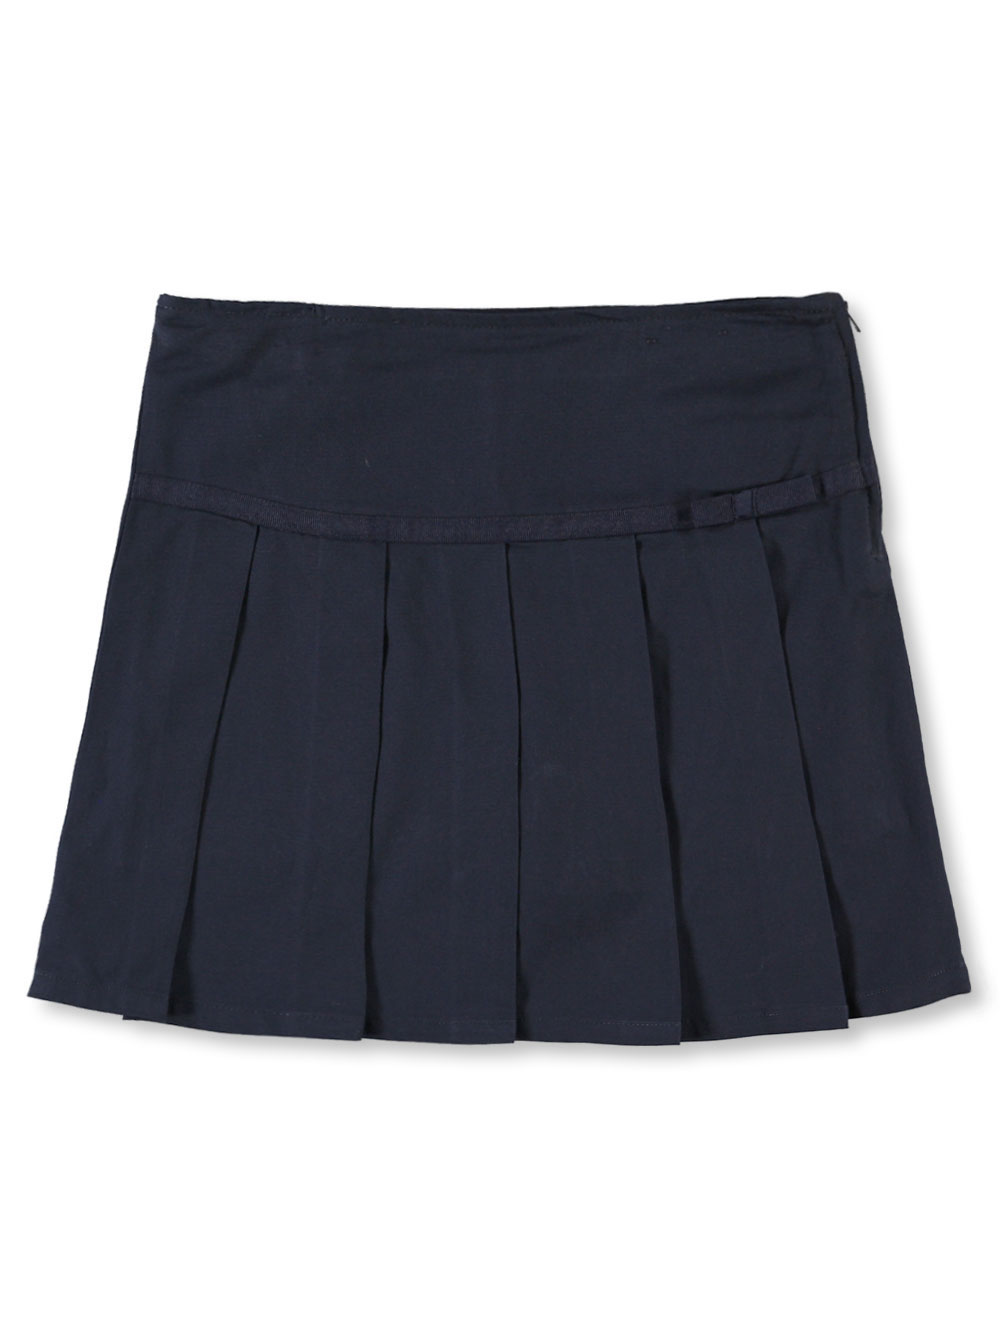 At School by French Toast French Toast Girls' Pleated Scooter Skirt